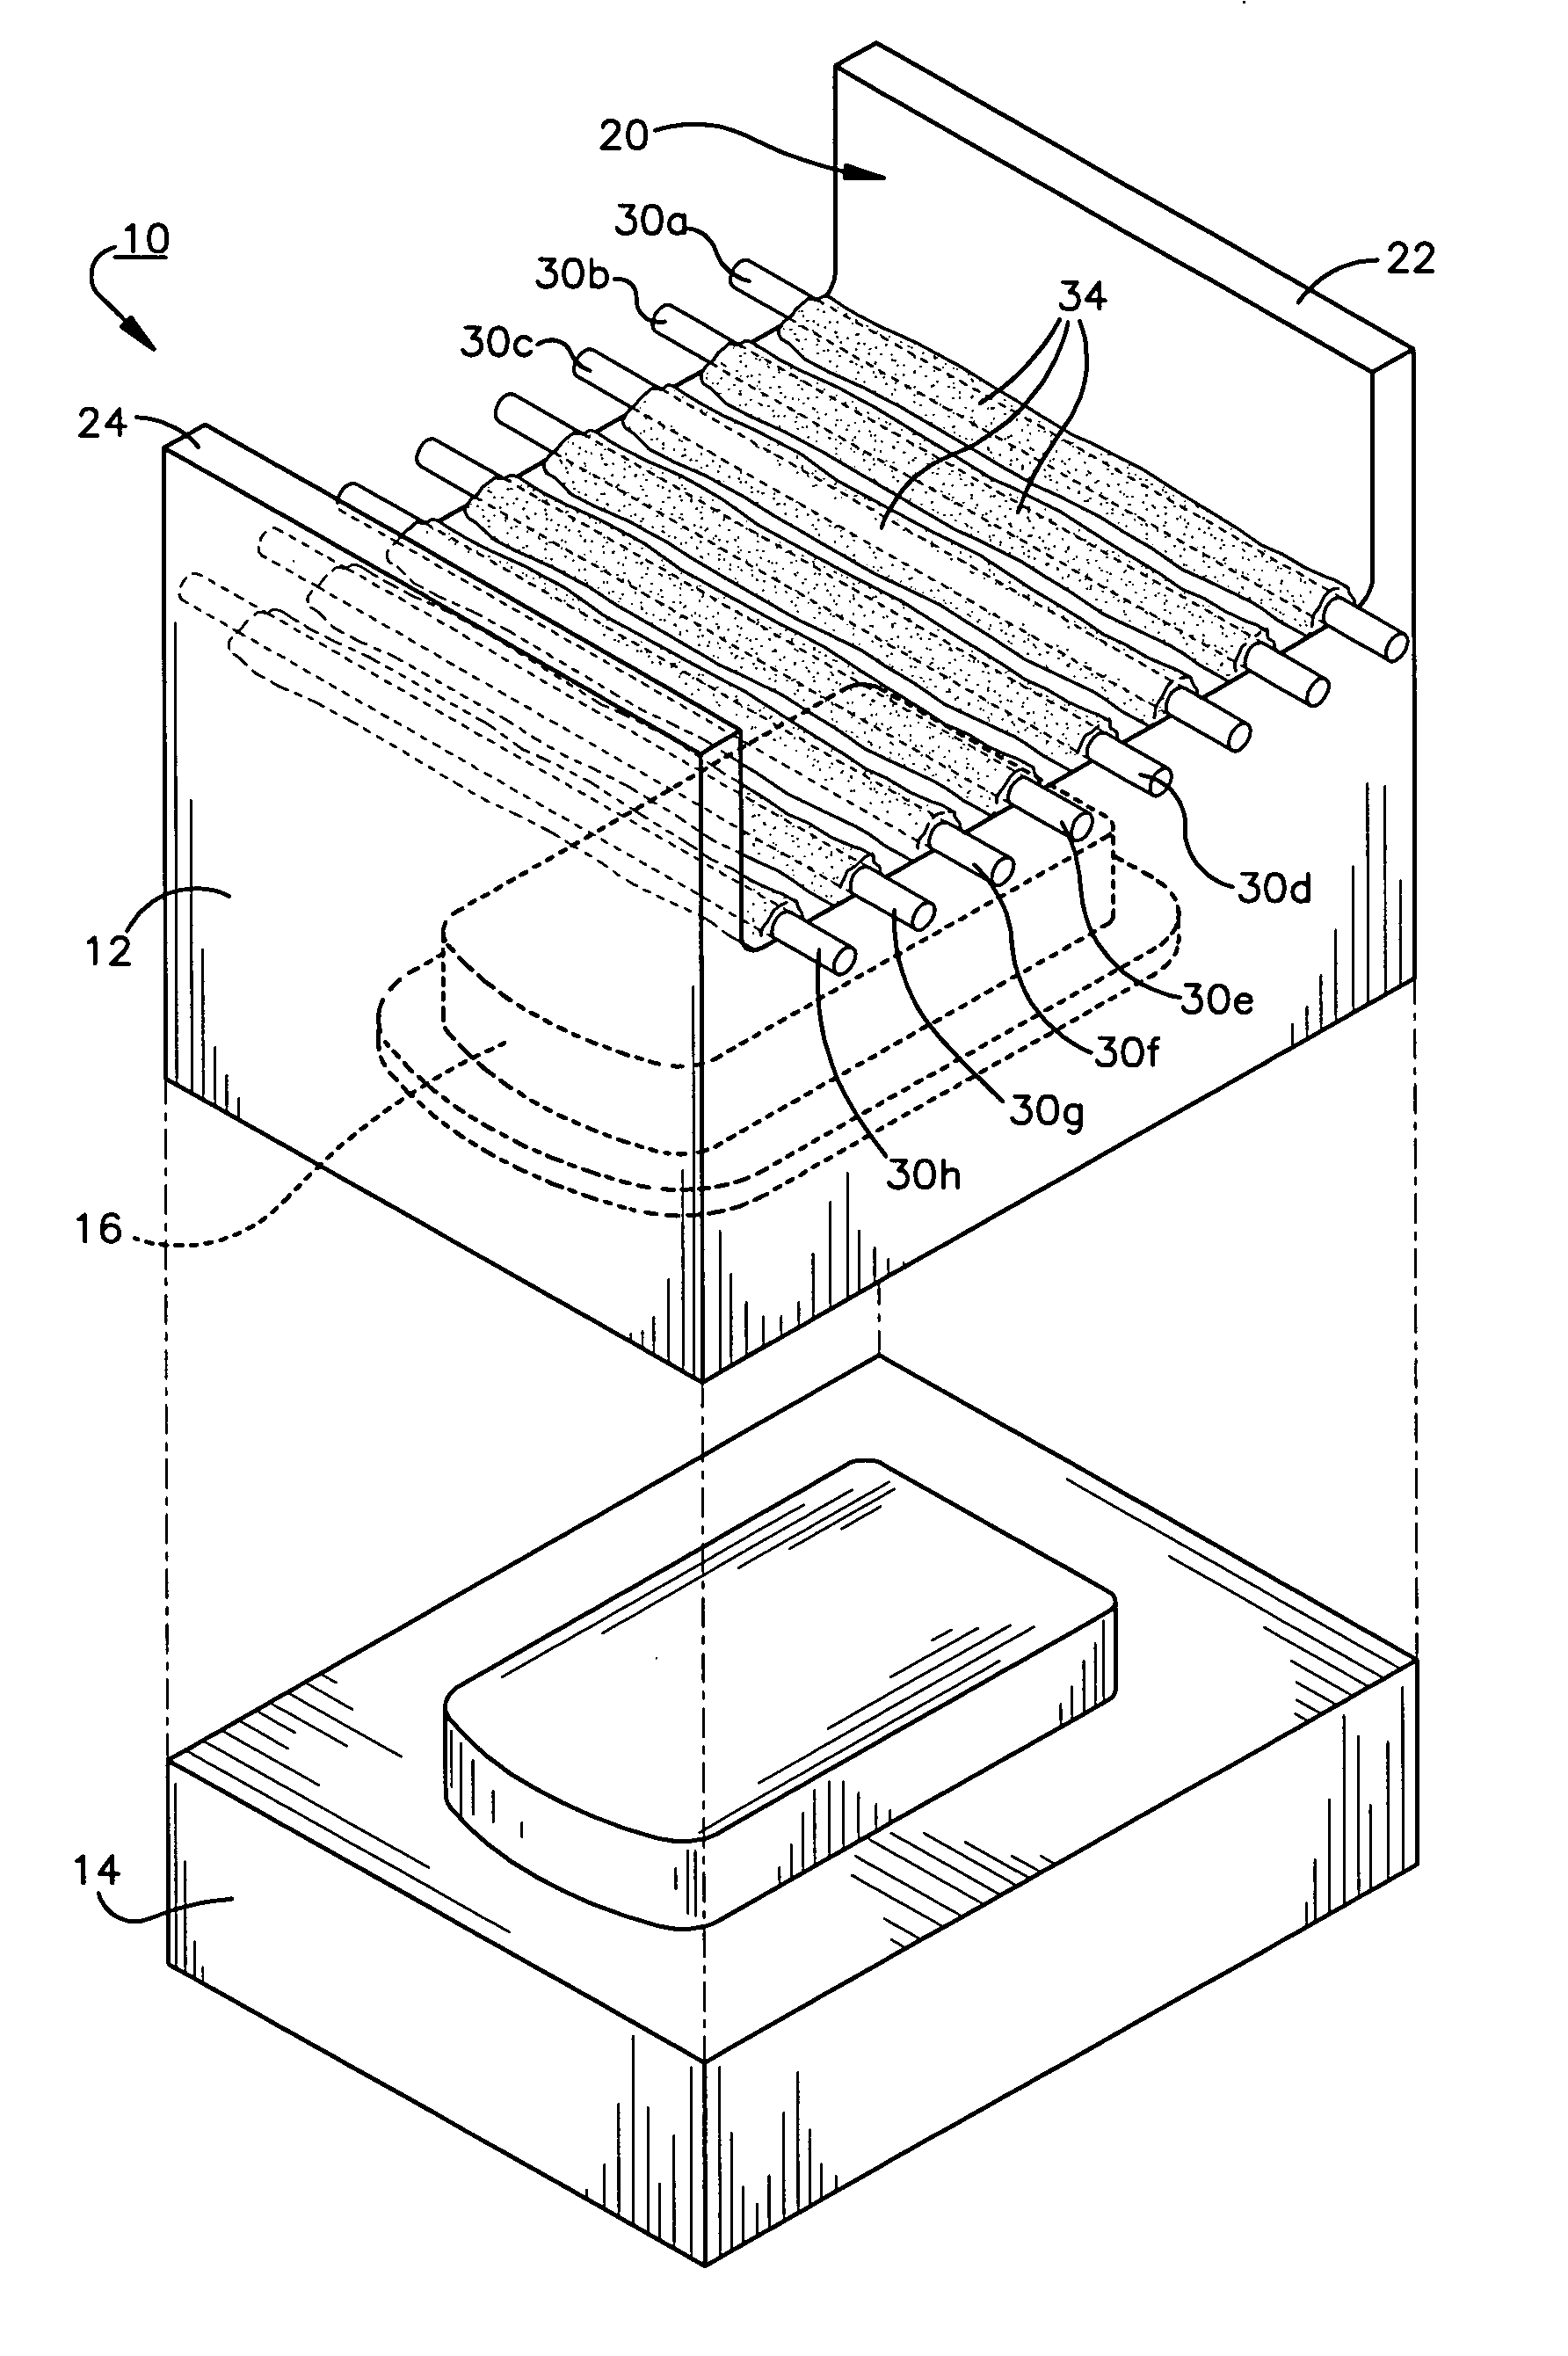 Heat transfer system for a mold